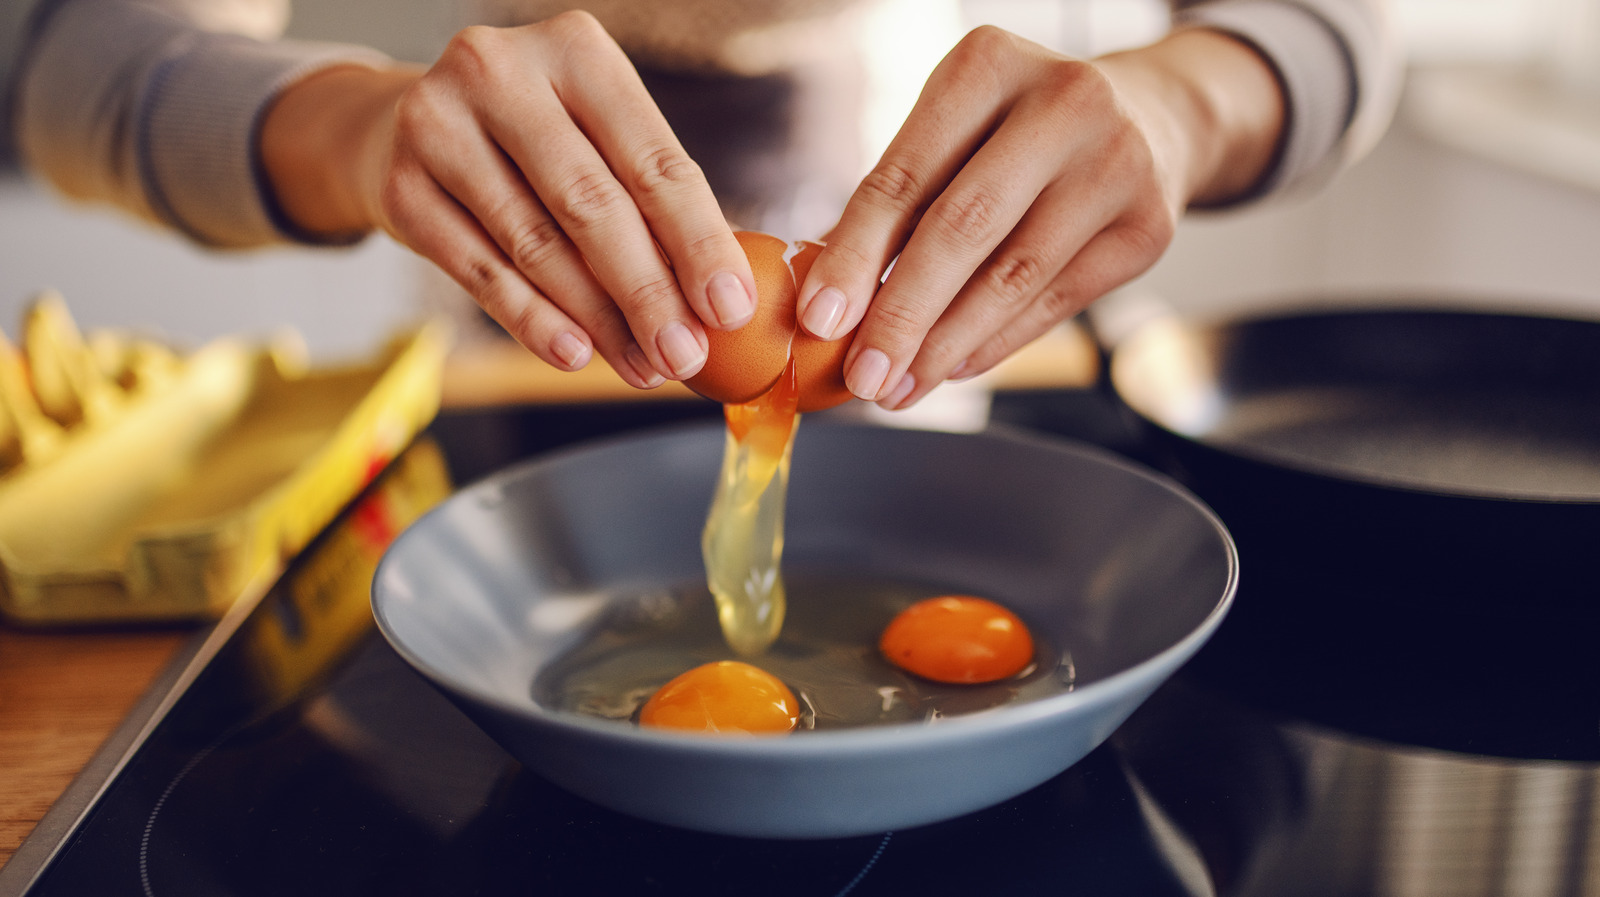 How To Poach A Perfect Egg In Breville Egg Pacher 